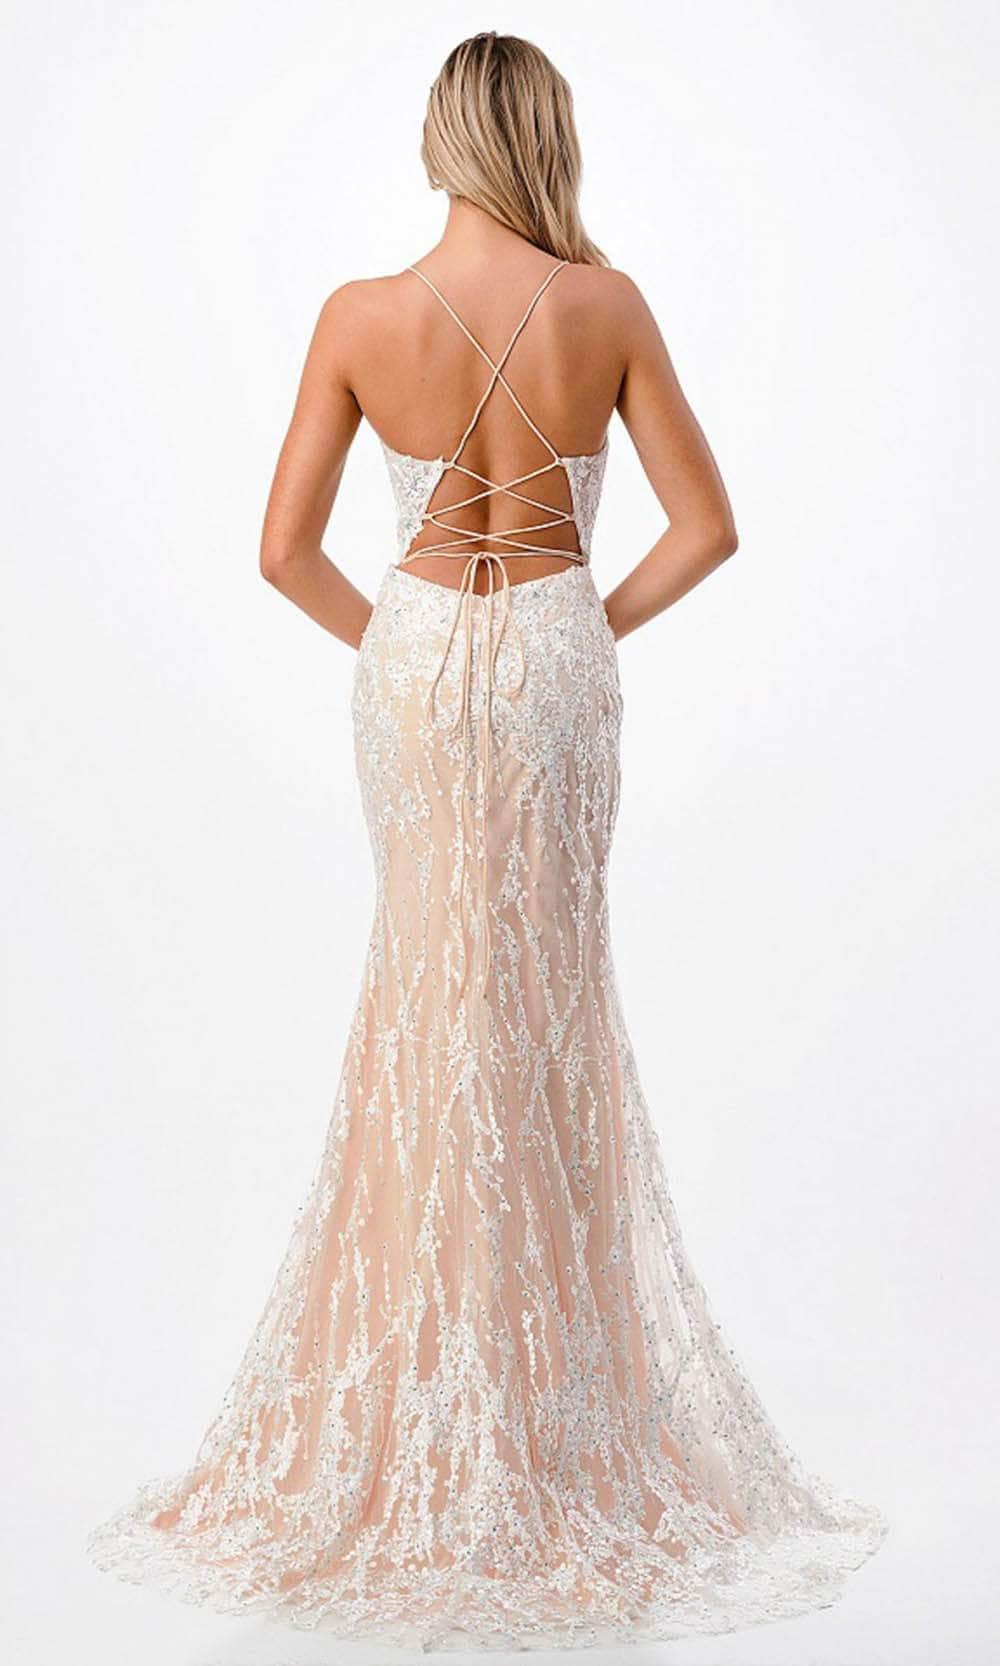 Aspeed Design P2211 - Embroidered Lace-Up Back Prom Dress Evening Dresses XS 